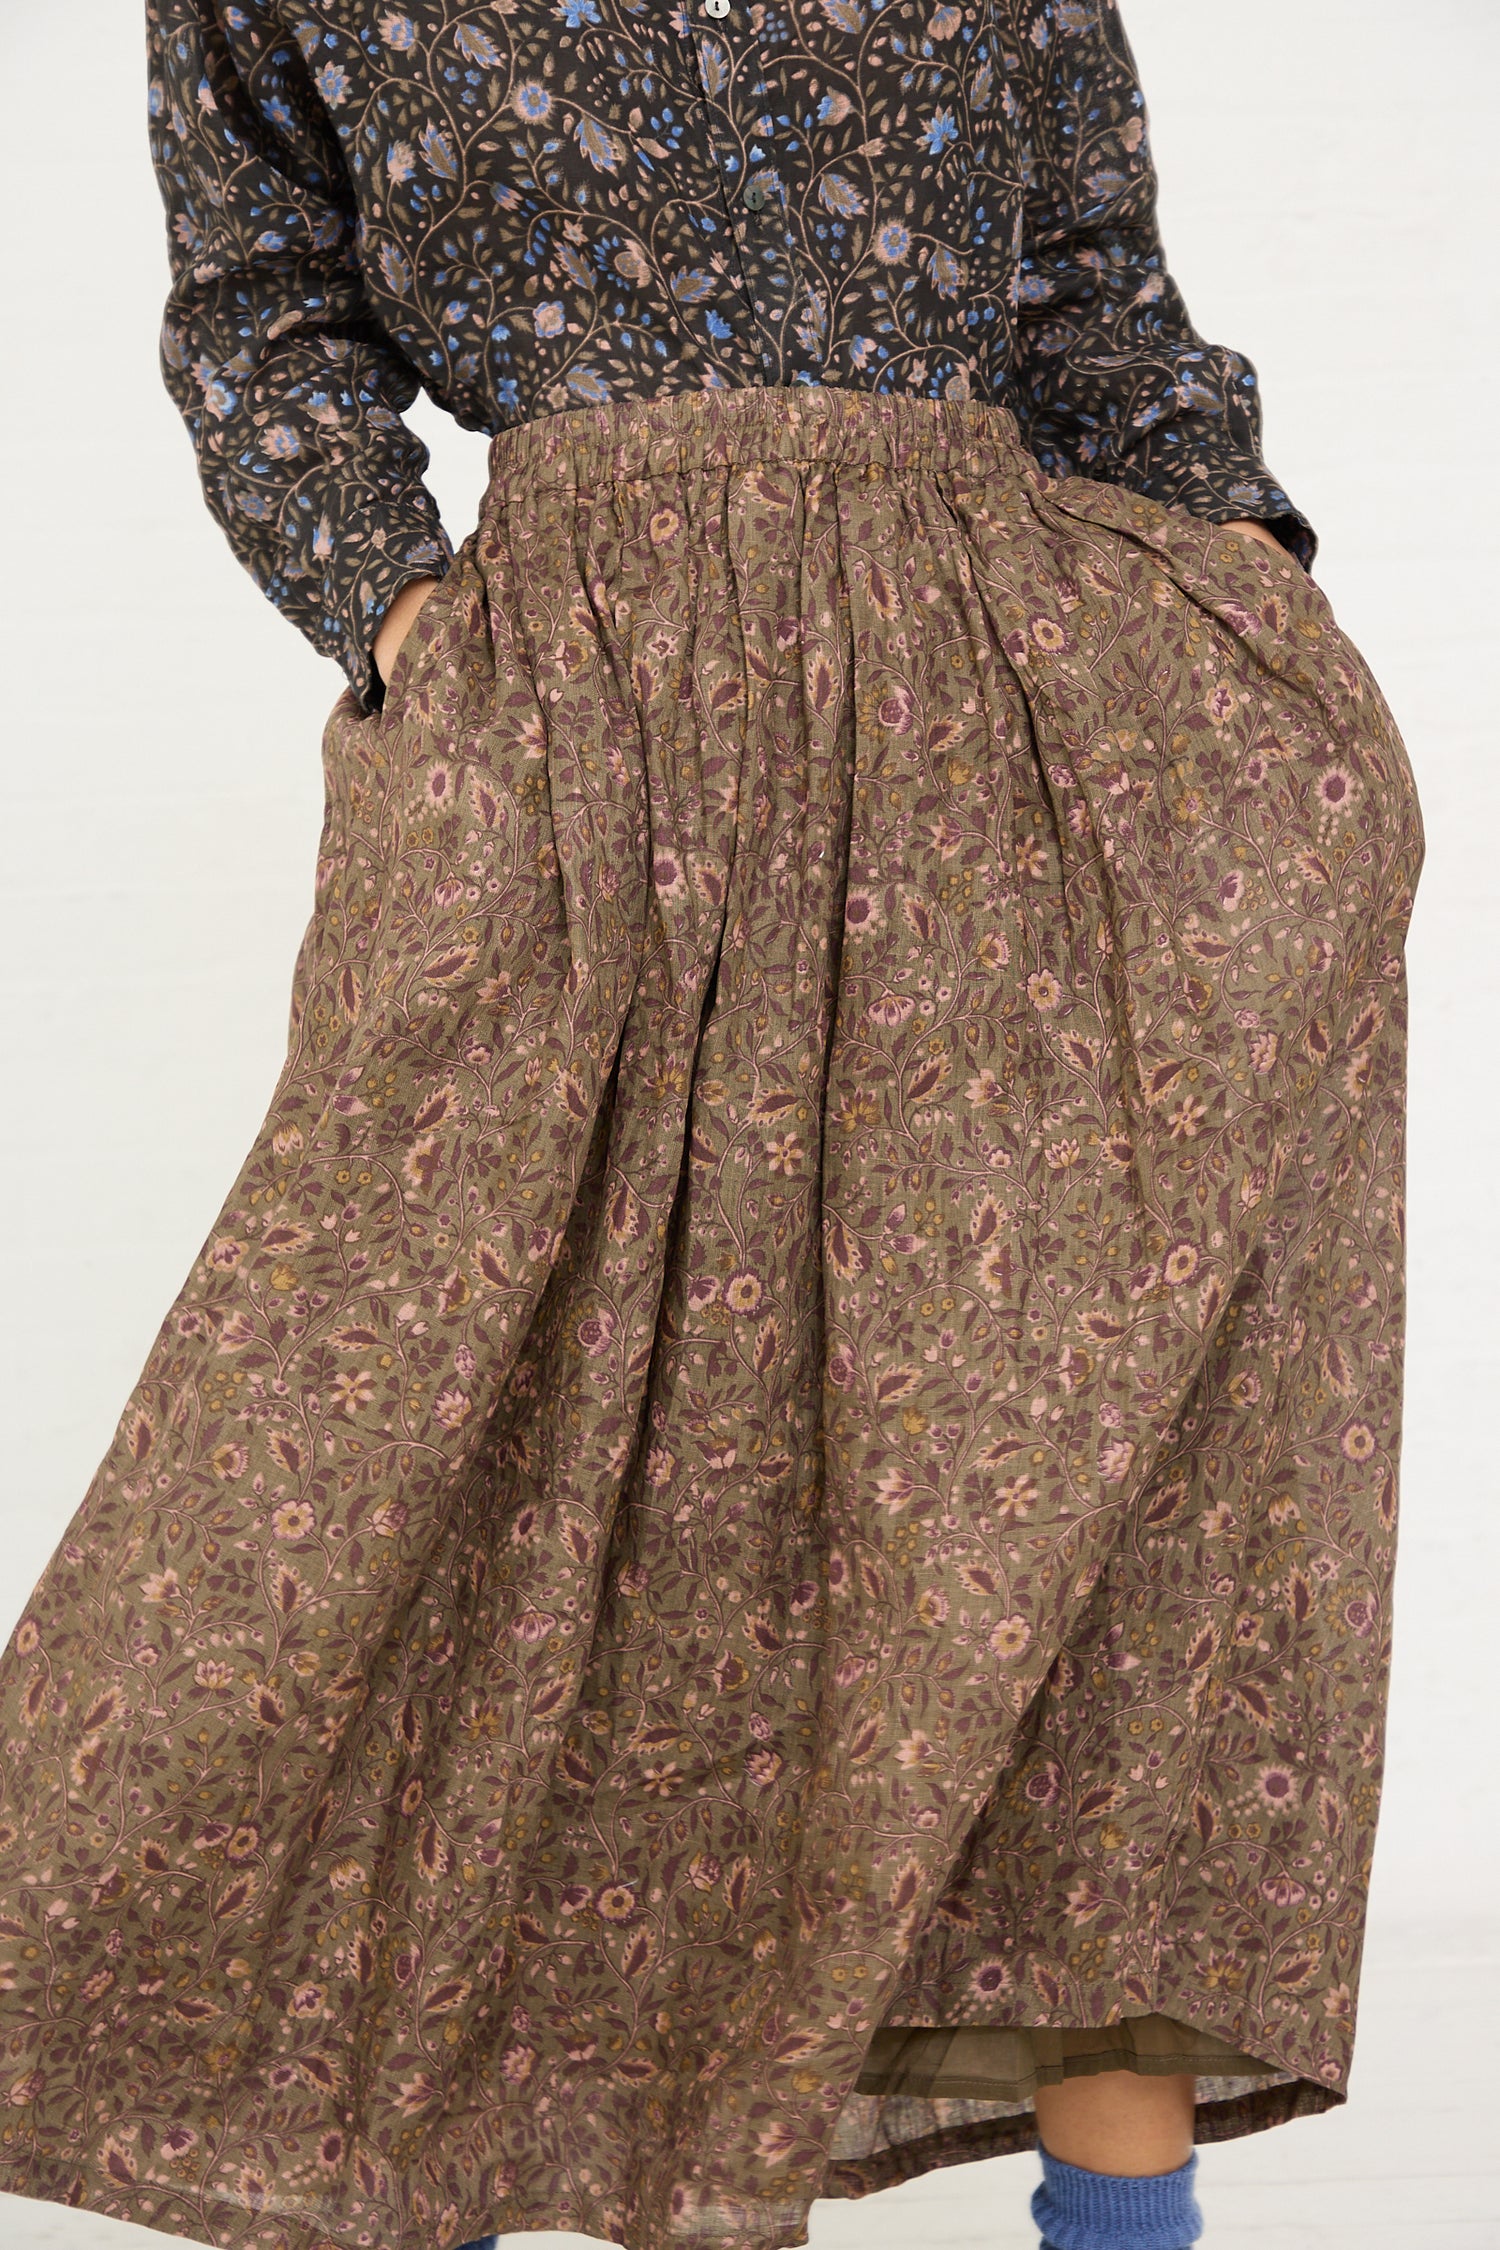 A person wearing a patterned blouse and a long, Linen Floral Skirt in Mocha from Ichi Antiquités with hands placed on the hips.